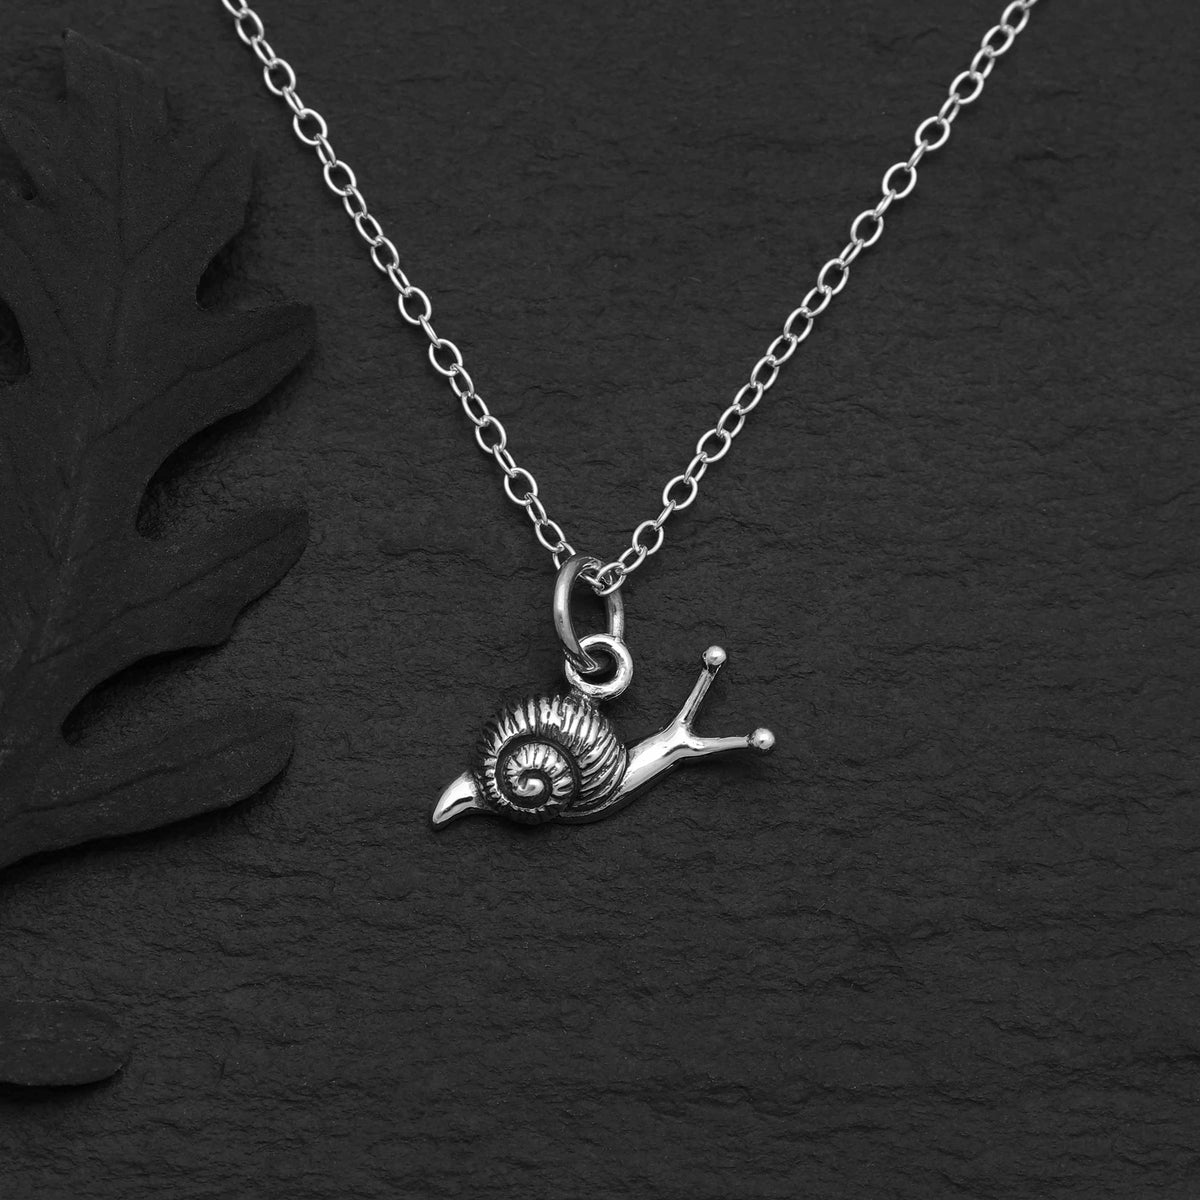 Sterling Silver 18 Inch Snail Charm Necklace